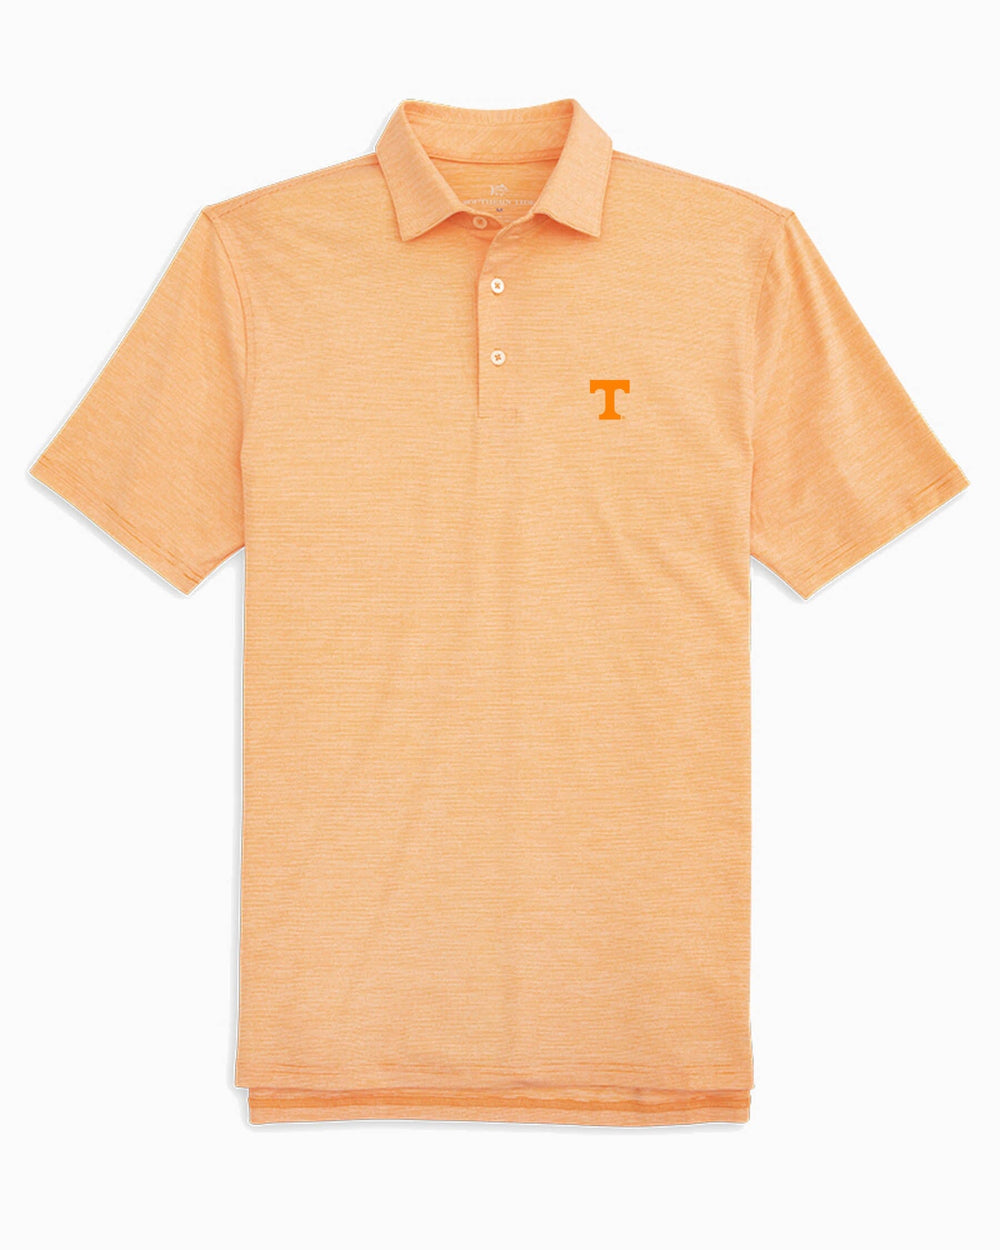 The front view of the Tennessee Vols Driver Spacedye Polo Shirt by Southern Tide - Rocky Top Orange